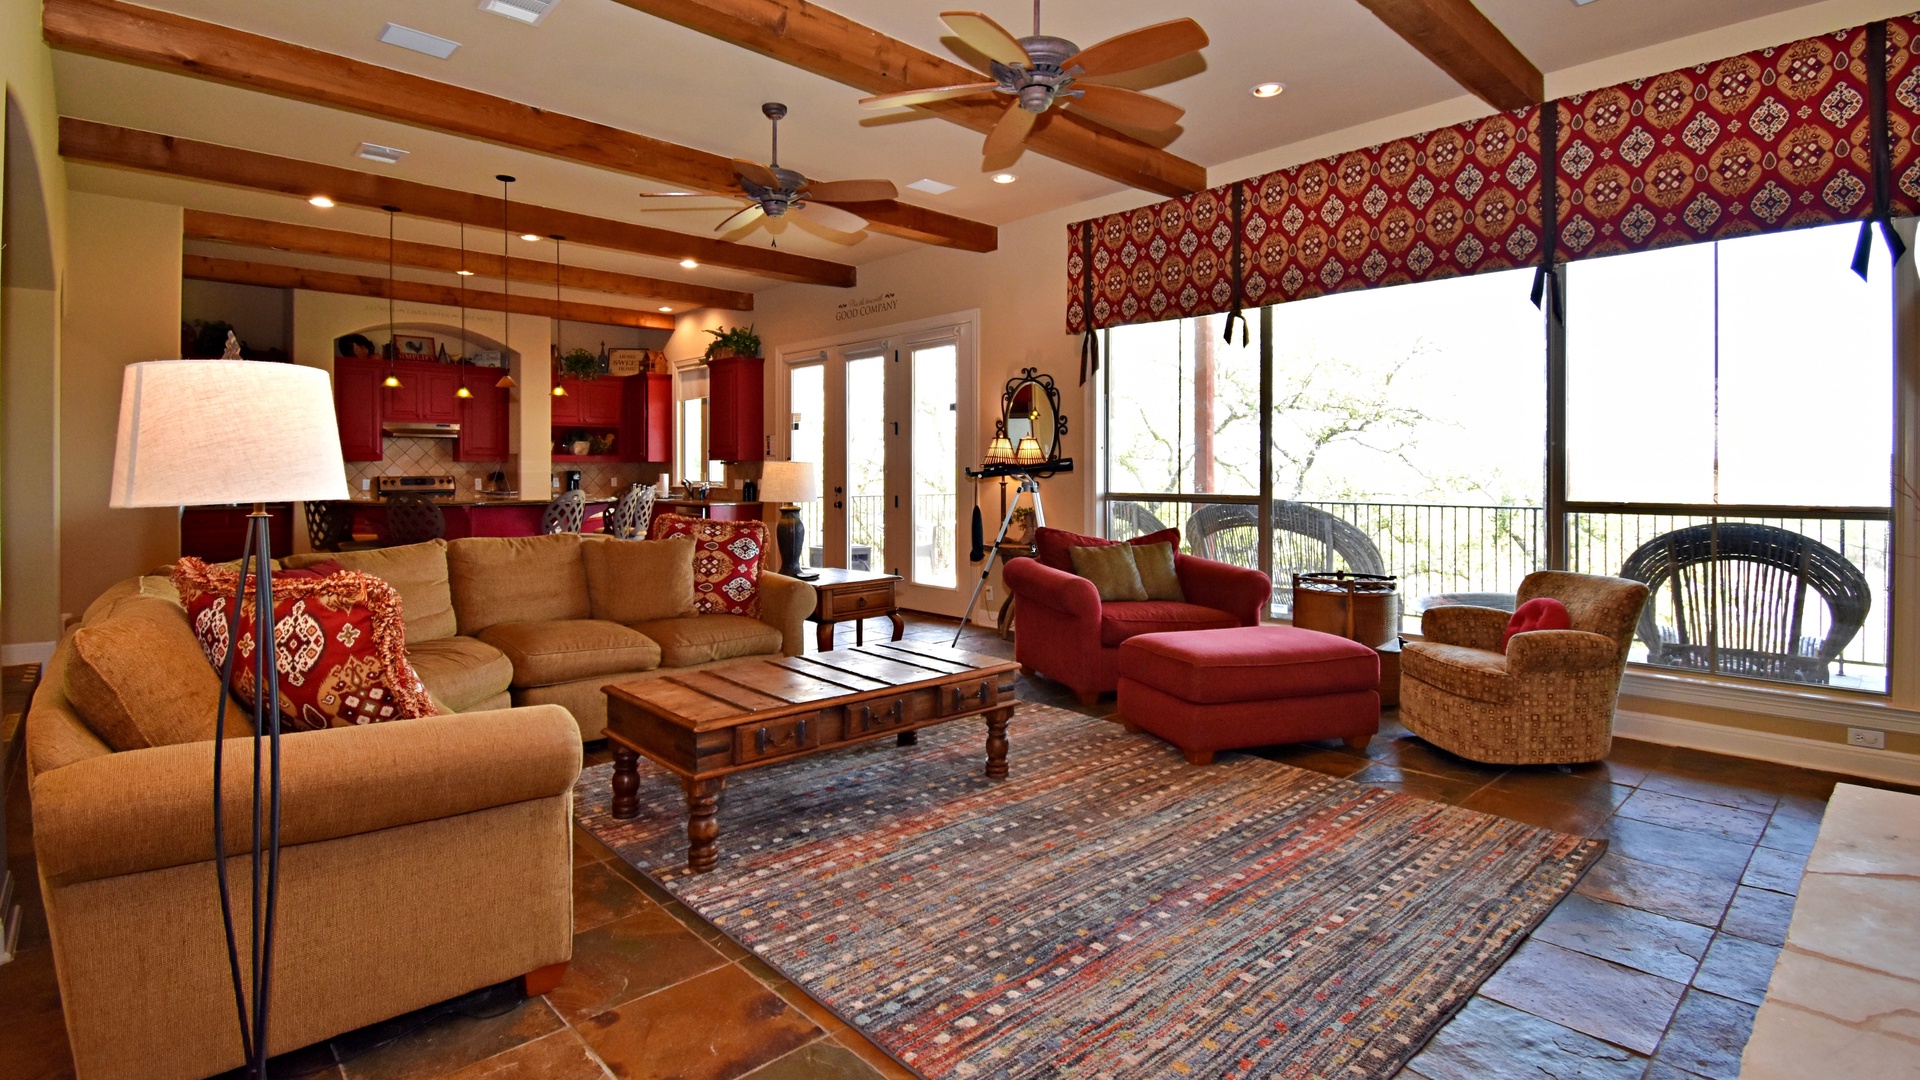 Open living space with lake view, TV, fireplace, and deck access